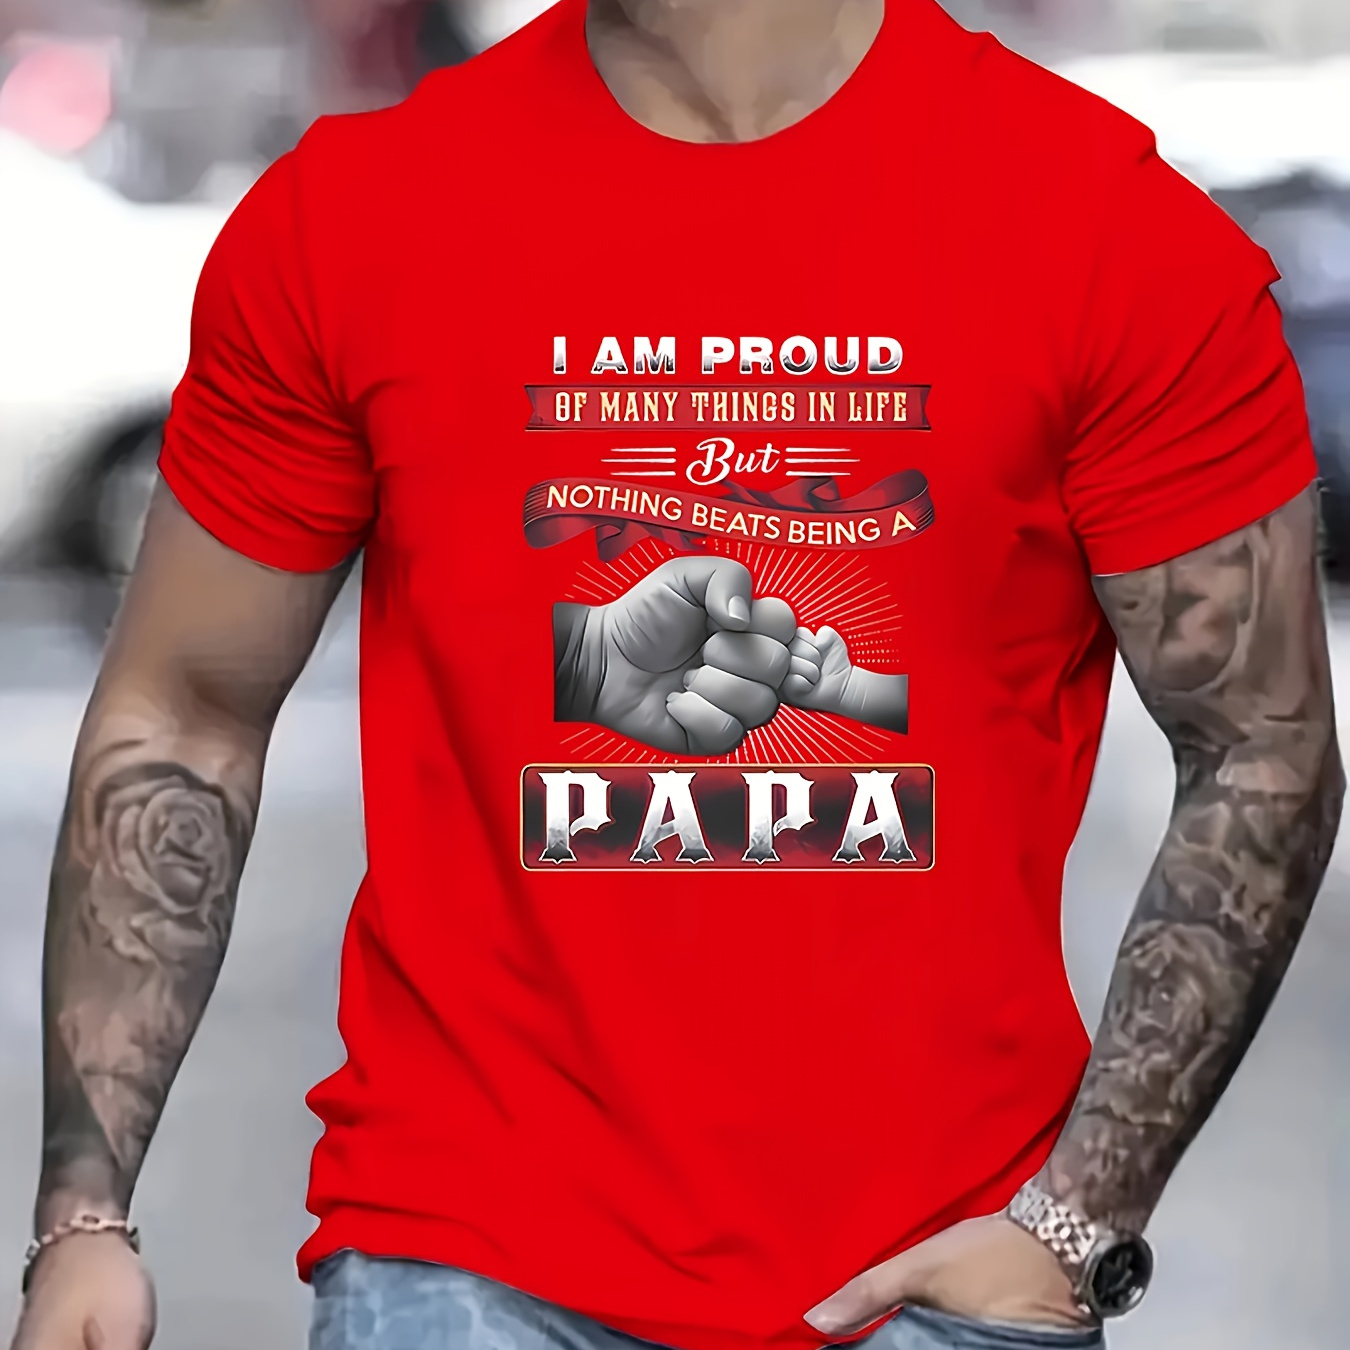 

Nothing Beats Being A Papa Print T Shirt, Tees For Men, Casual Short Sleeve T-shirt For Summer